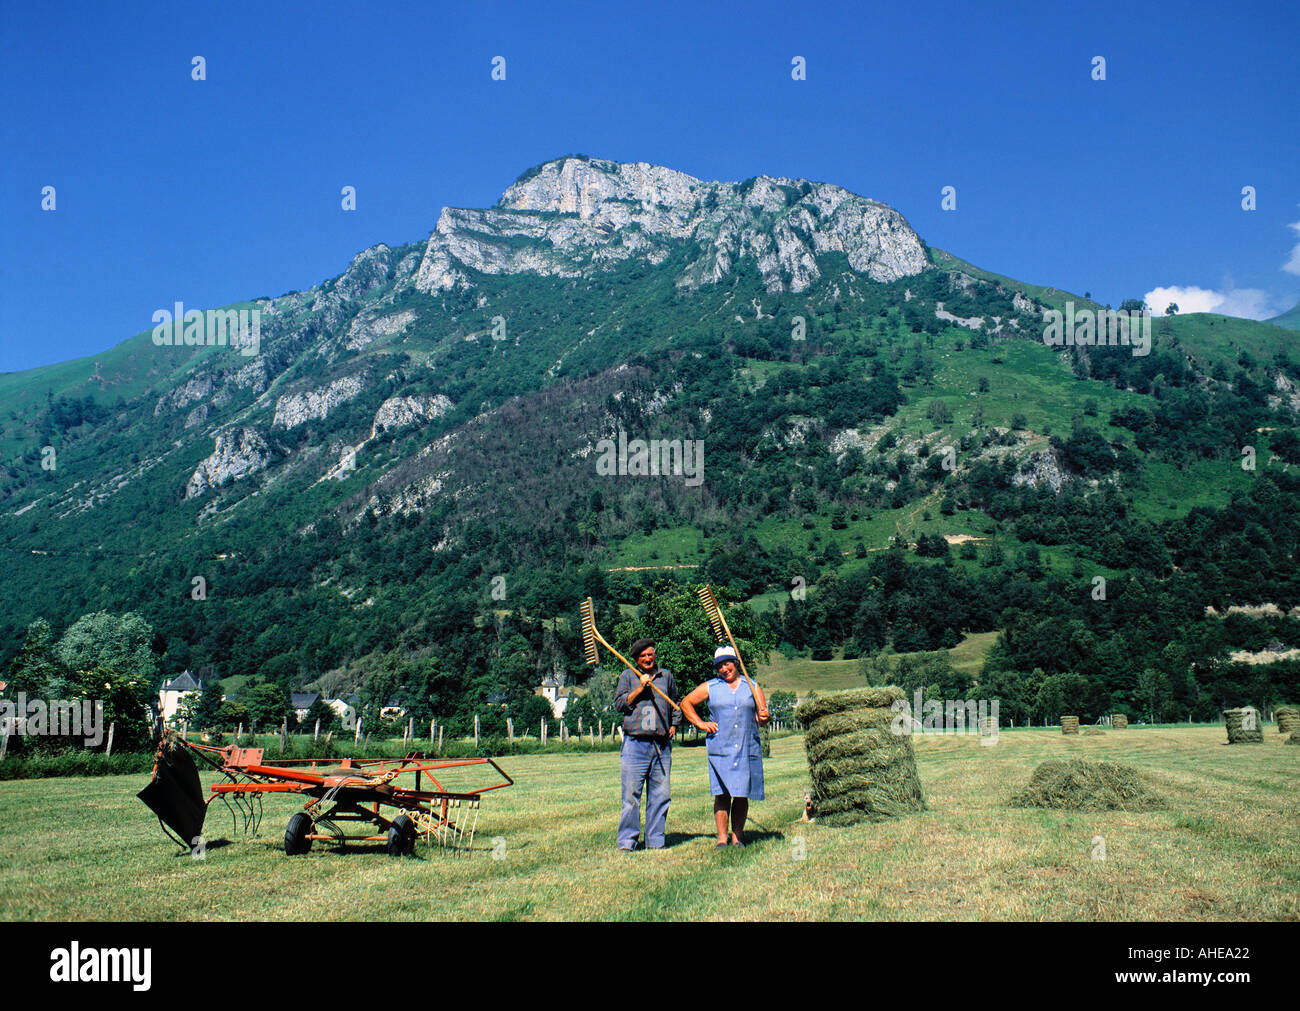 Farmers in field near Arudy, Pyrenees, France Stock Photo